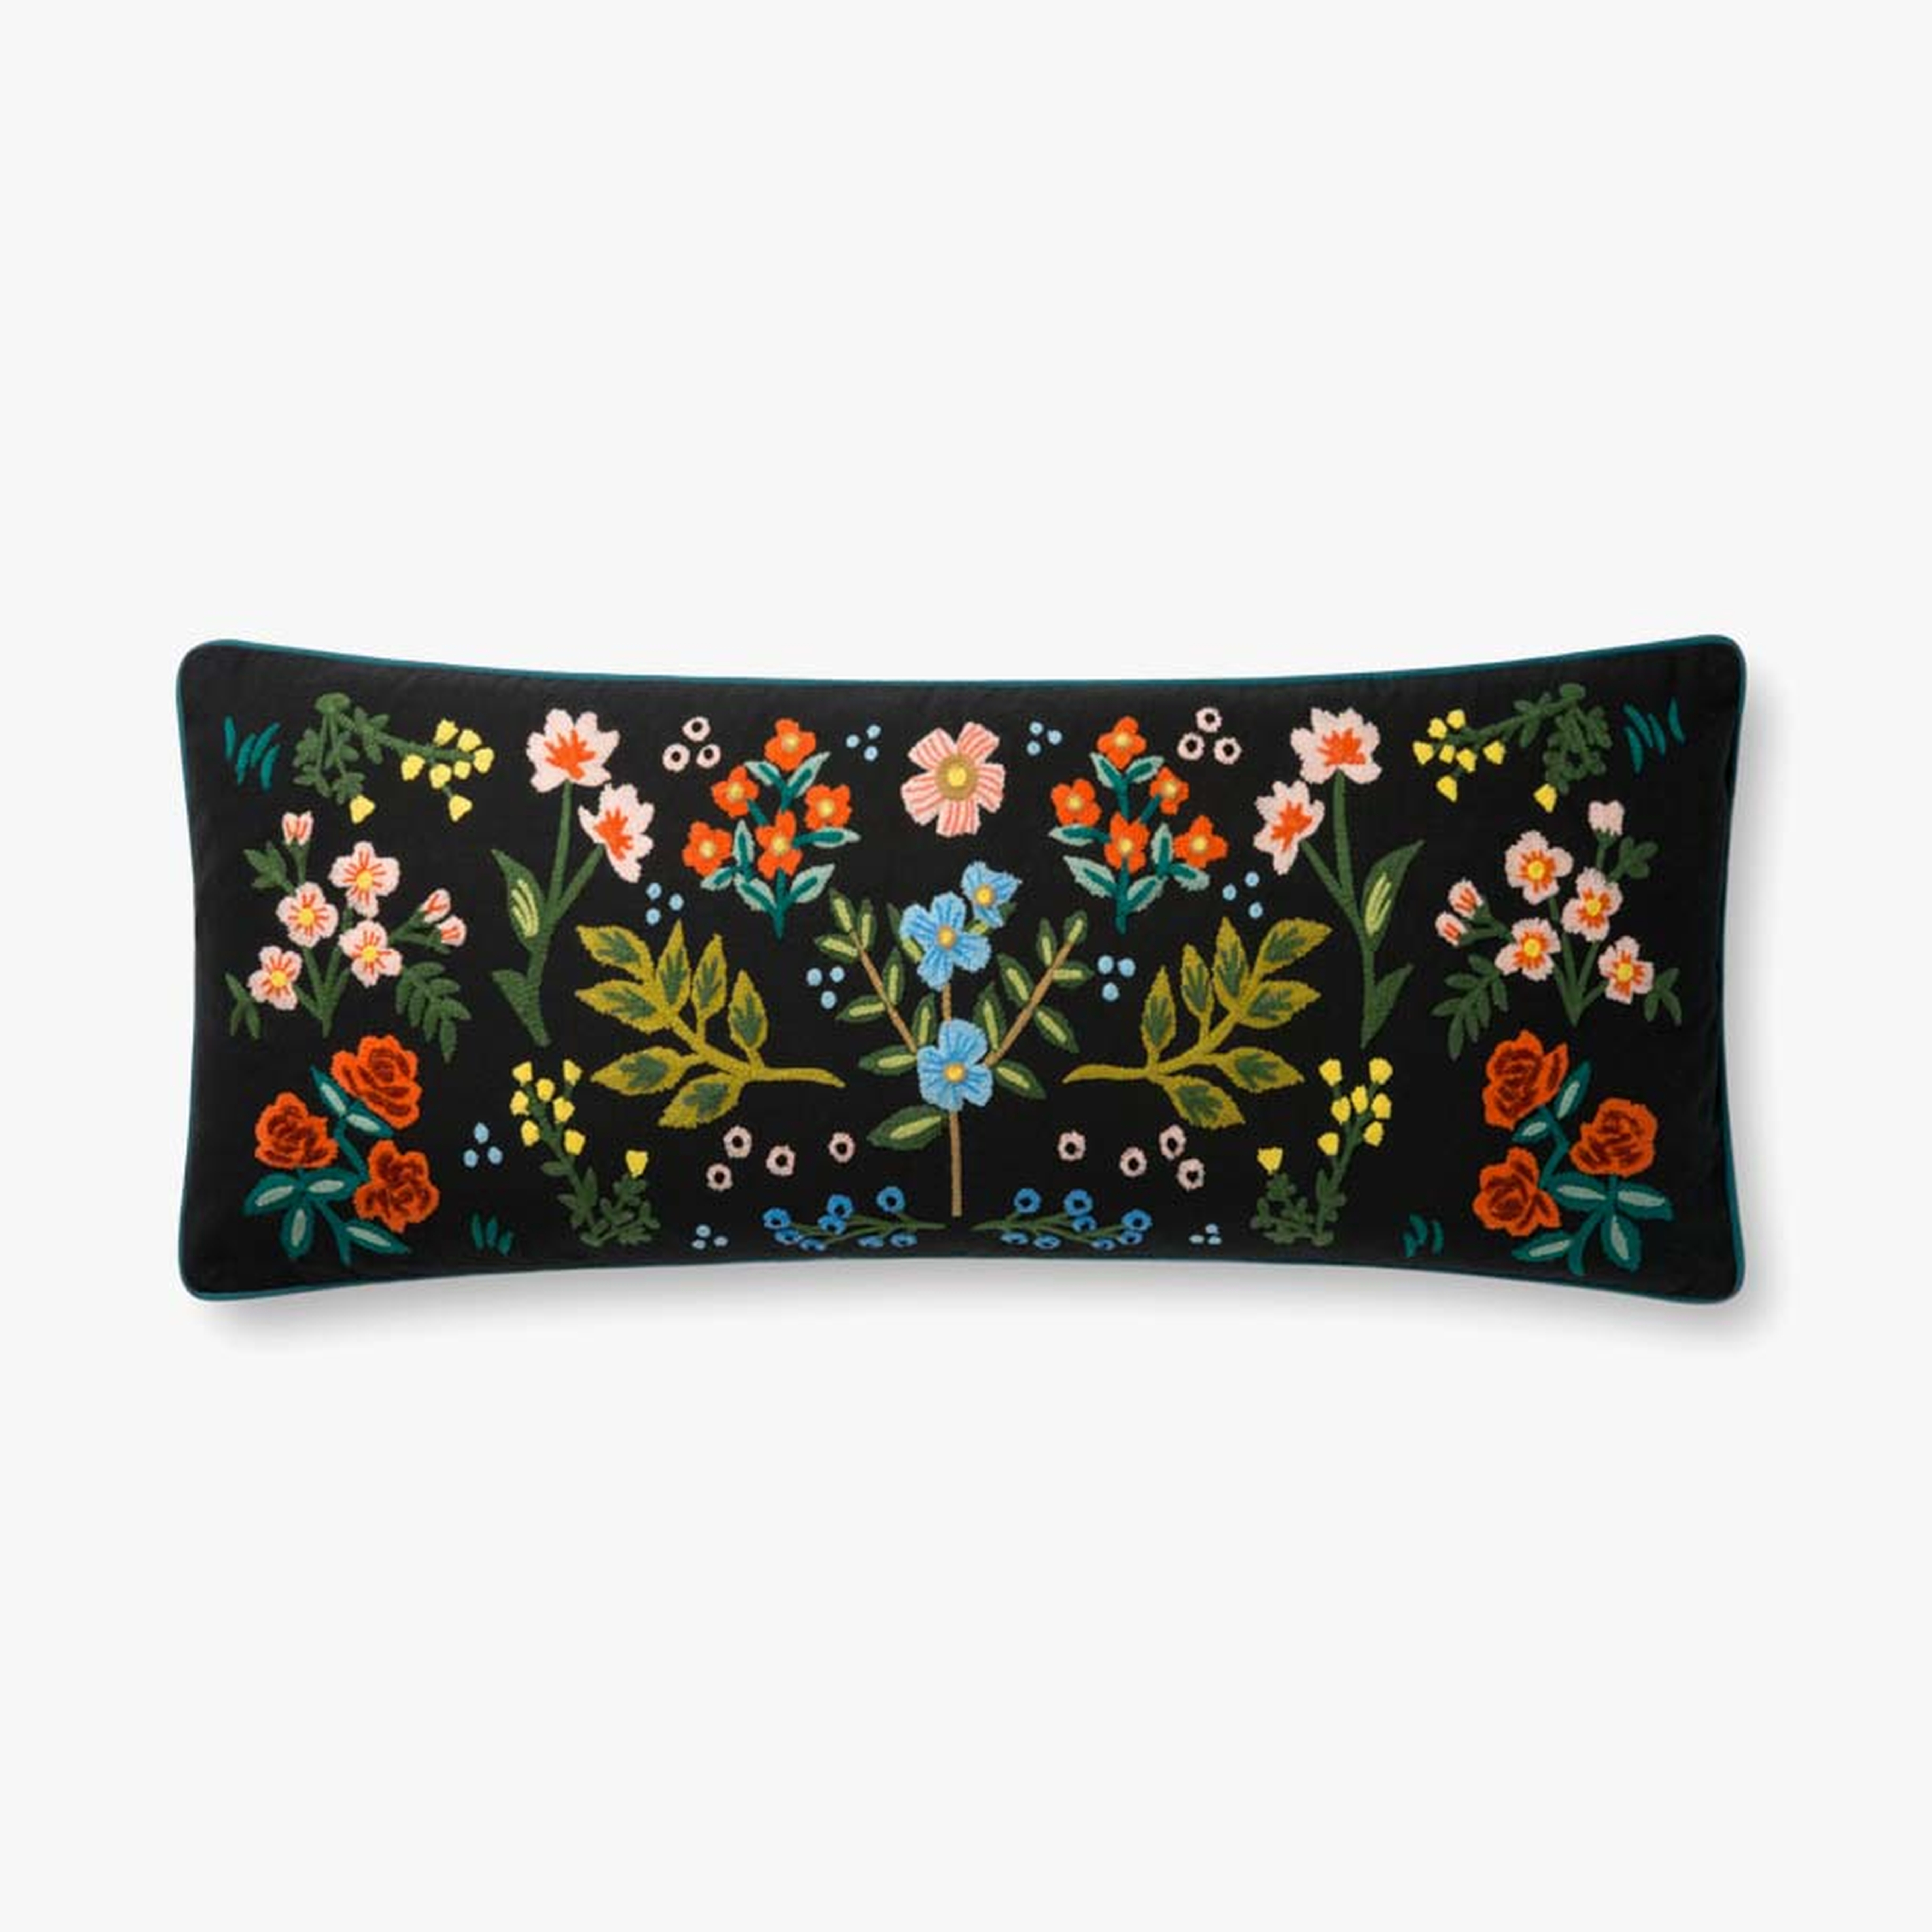 Rifle Paper Co. x Loloi Pillows P6028 Black / Multi 13" x 35" Cover Only - Loloi Rugs